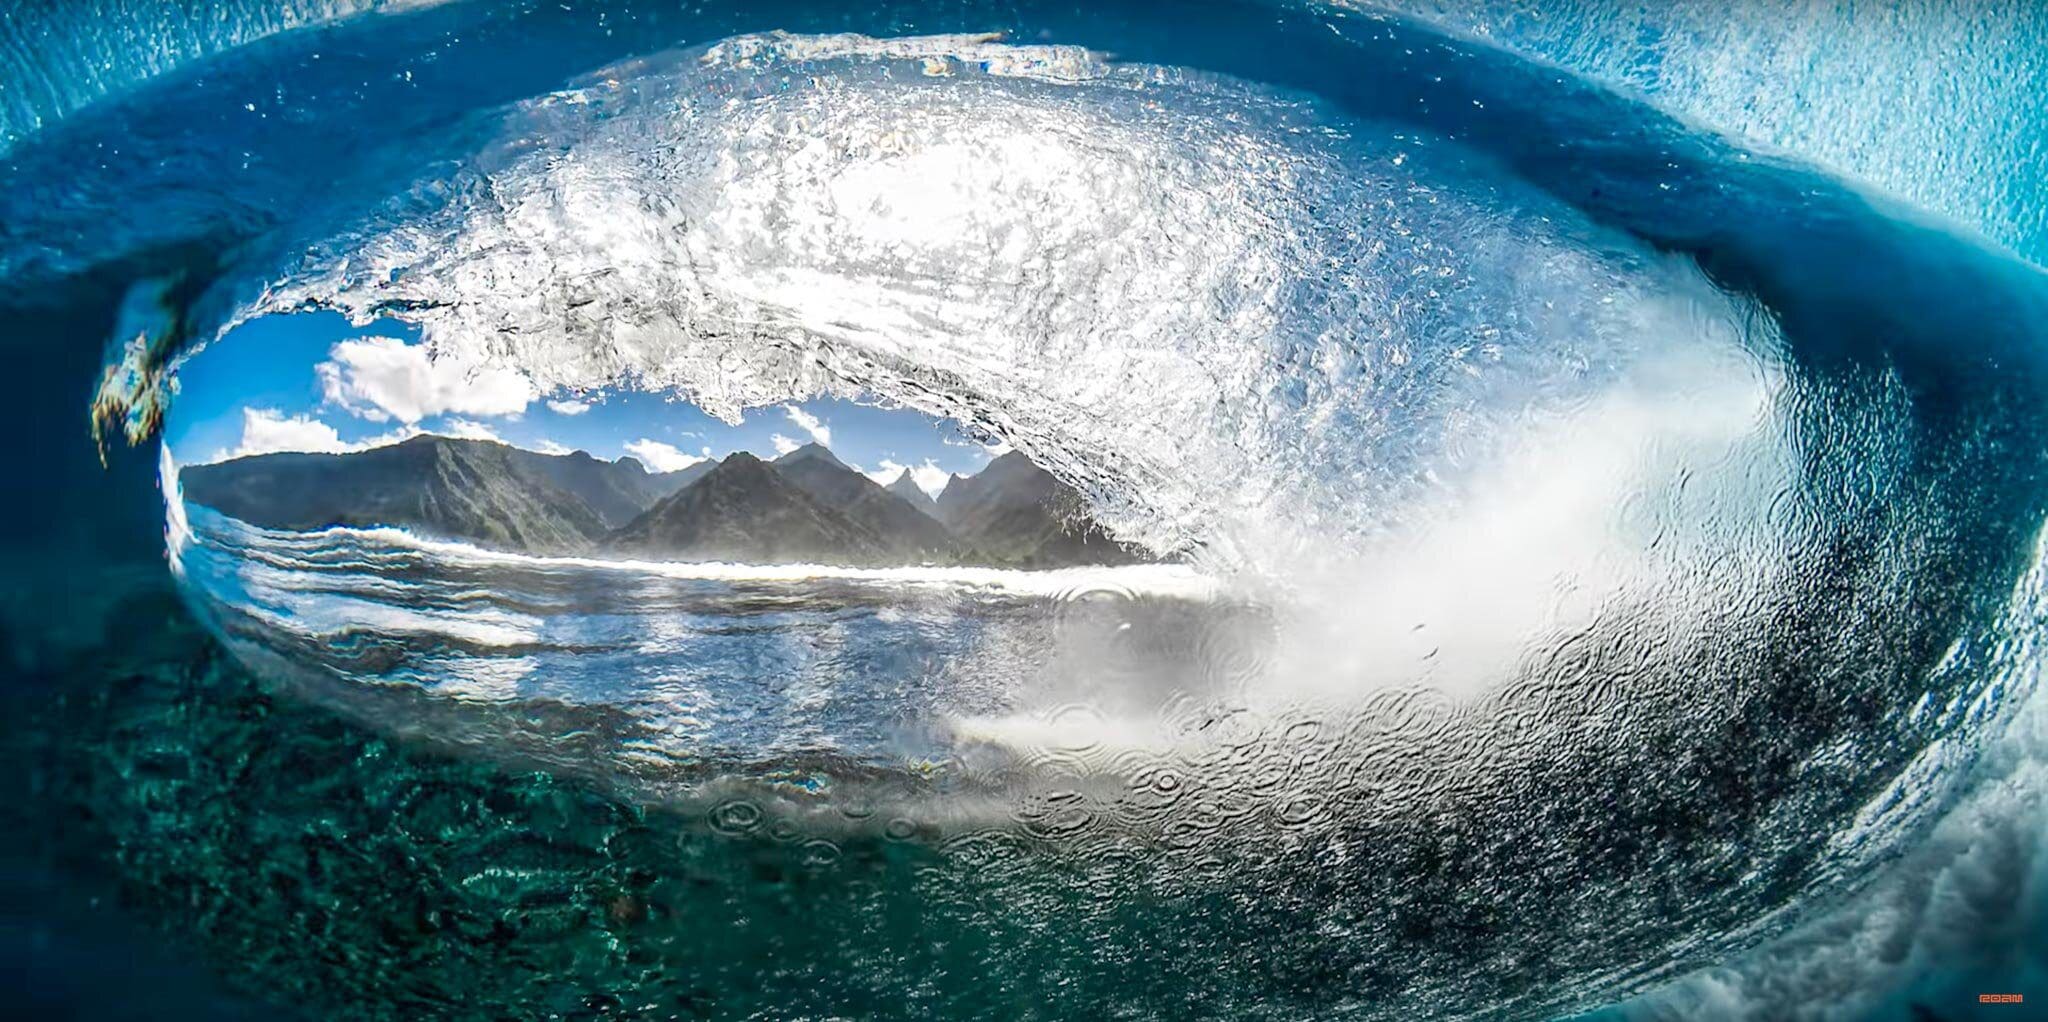 One day, Ben realized he could actually shoot the land from underwater, through a moving wave! With each wave bringing a new perspective, the familiar Tahitian landscape was getting a new look as well. It’s almost literally a natural fish-eye lens. Photo by Ben Thouard and ROAM Media.